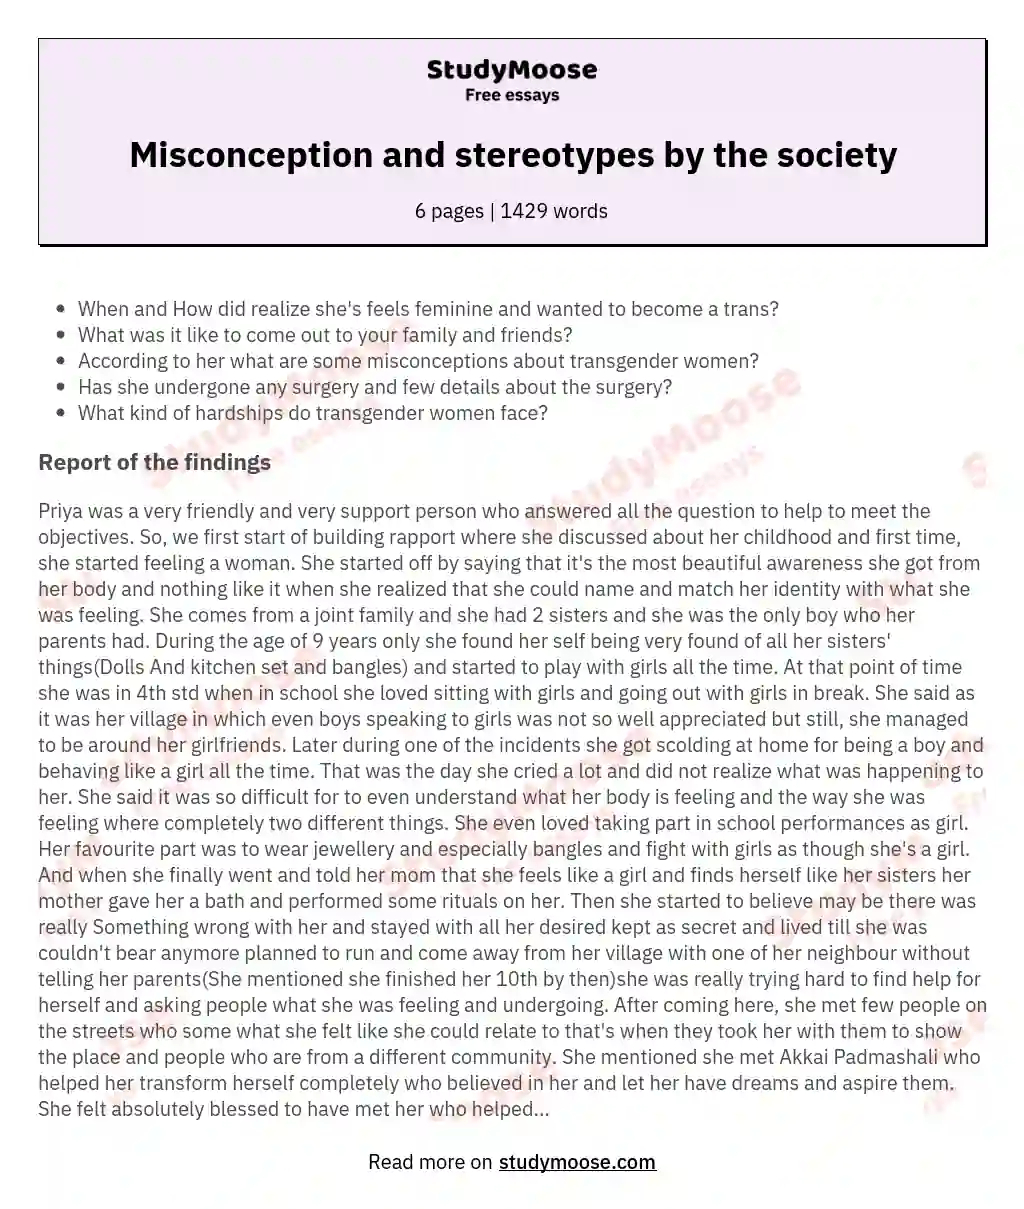 Misconception and stereotypes by the society essay